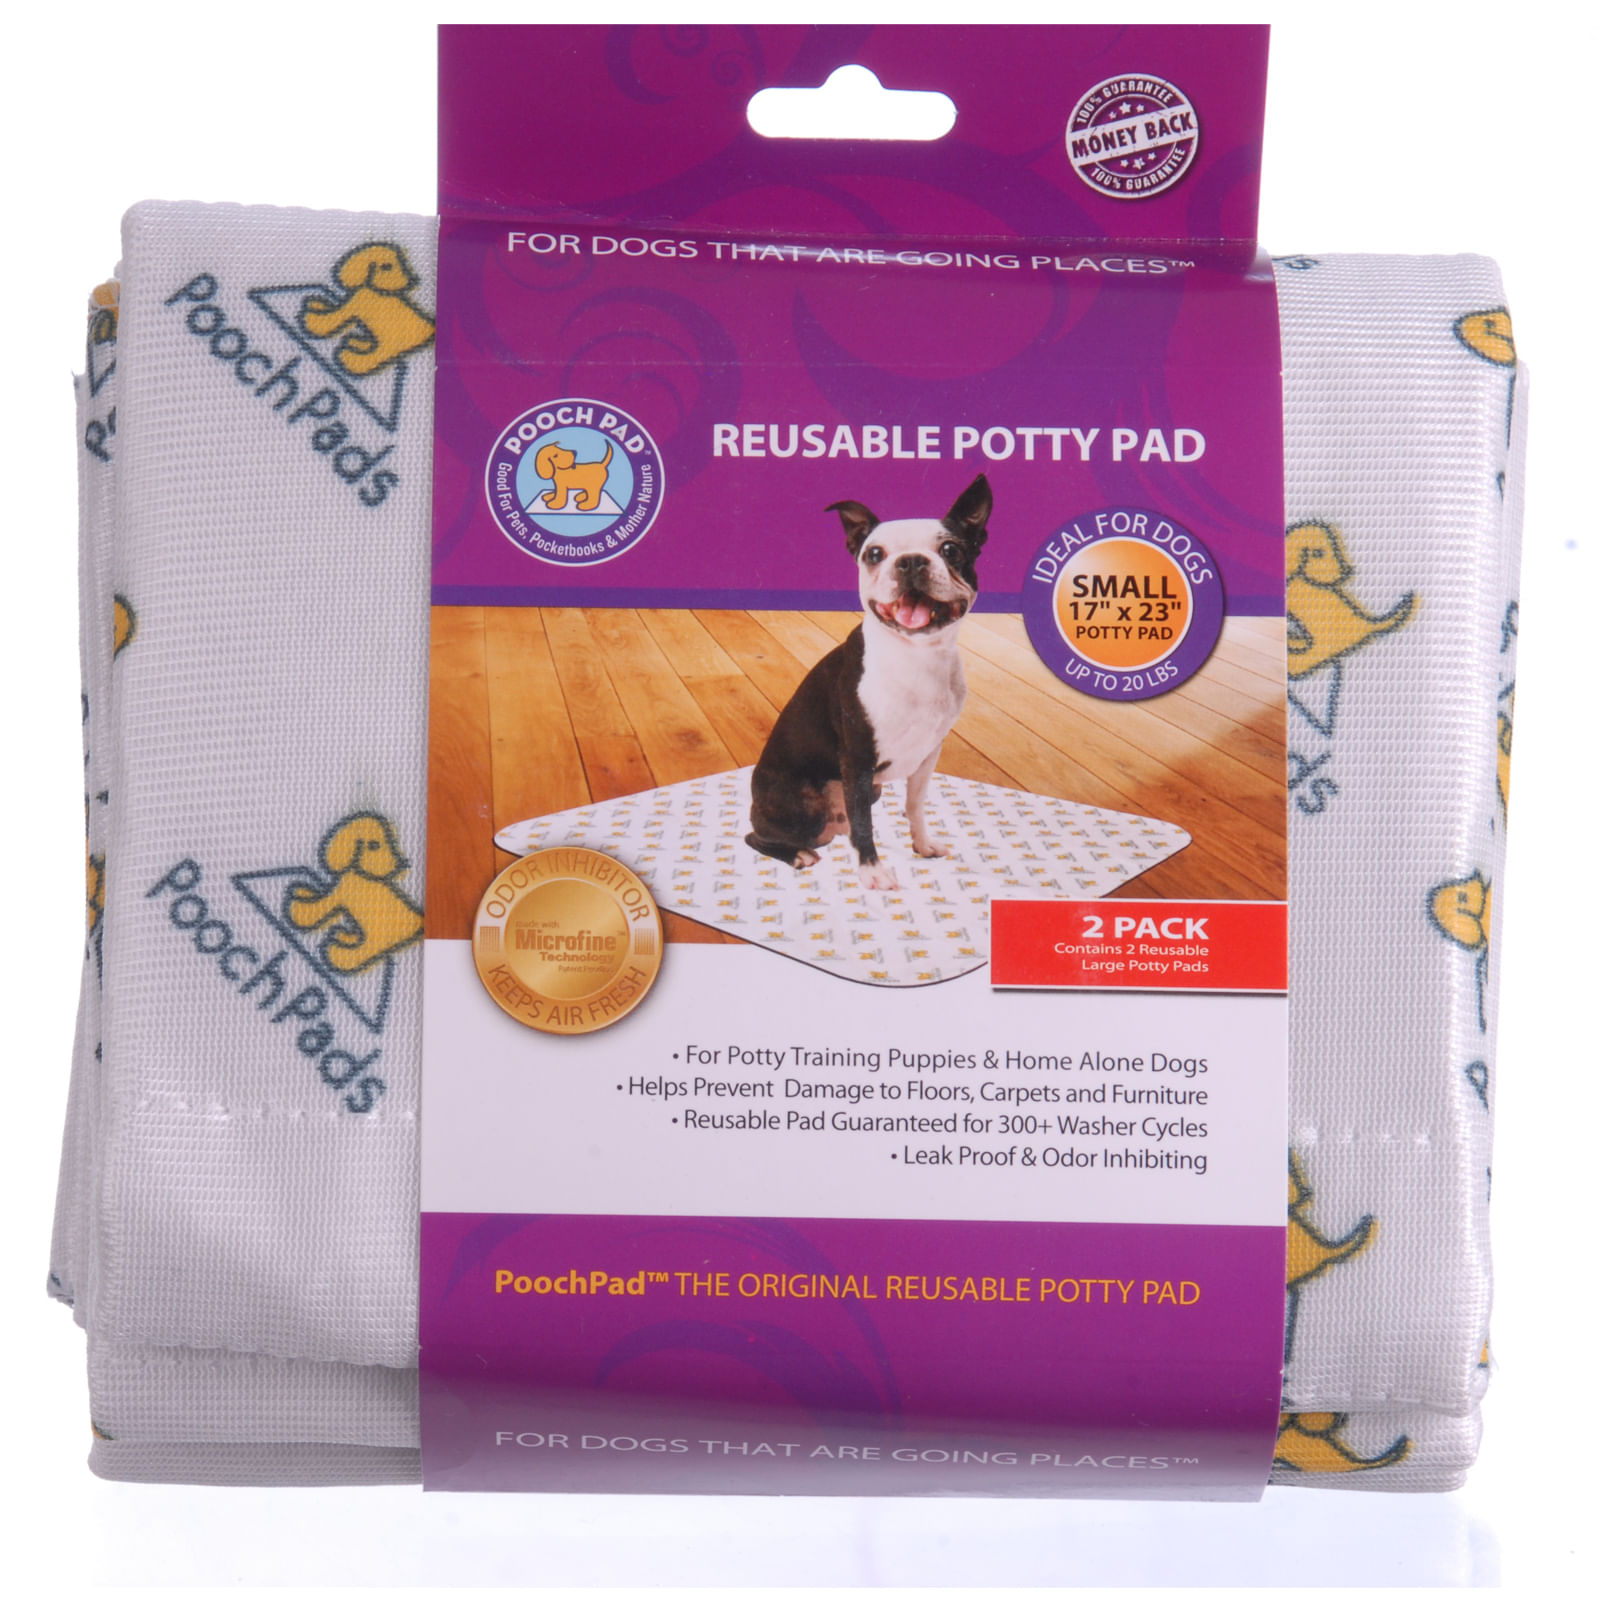 PoochPad Extra Absorbent Reusable Dog Potty Pad for Mature Dogs